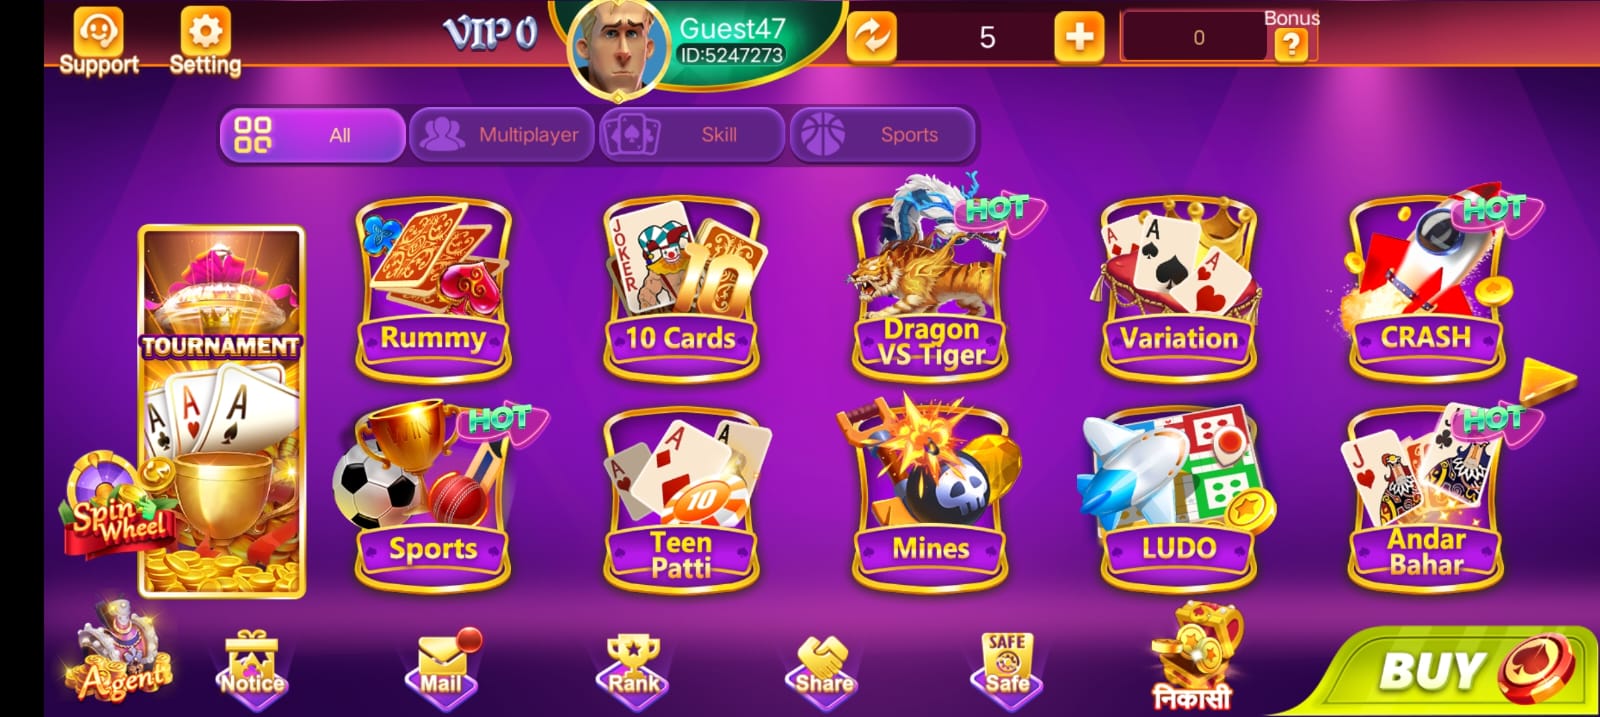 Available Game’s In Rummy Tour Apk